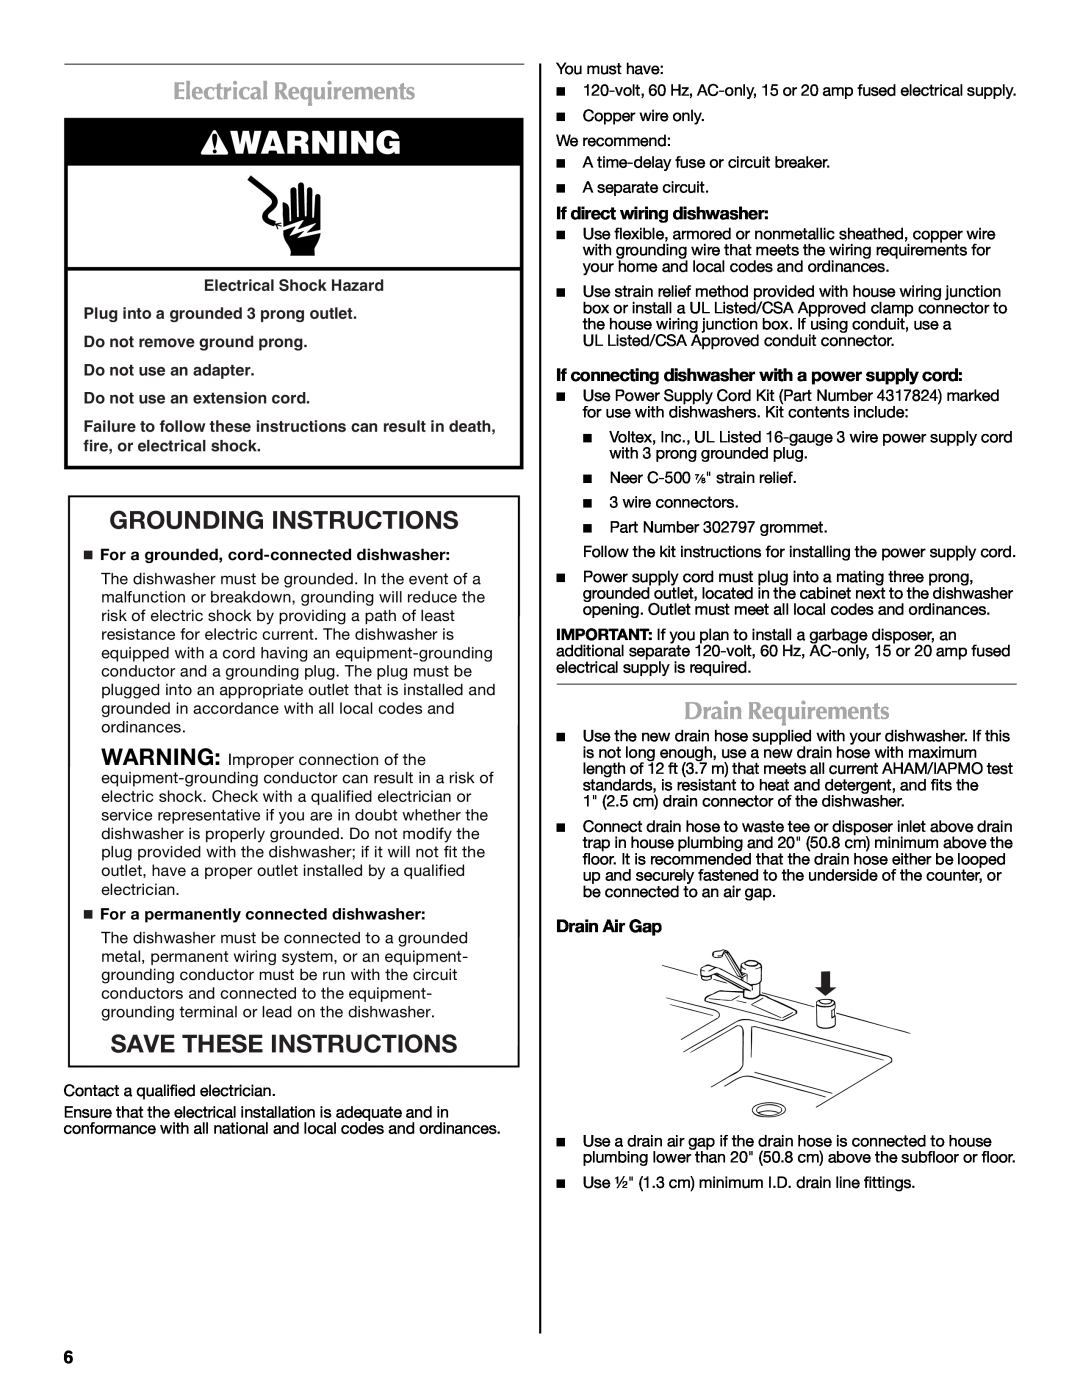 Maytag W10300218B Electrical Requirements, Grounding Instructions, Save These Instructions, Drain Requirements 